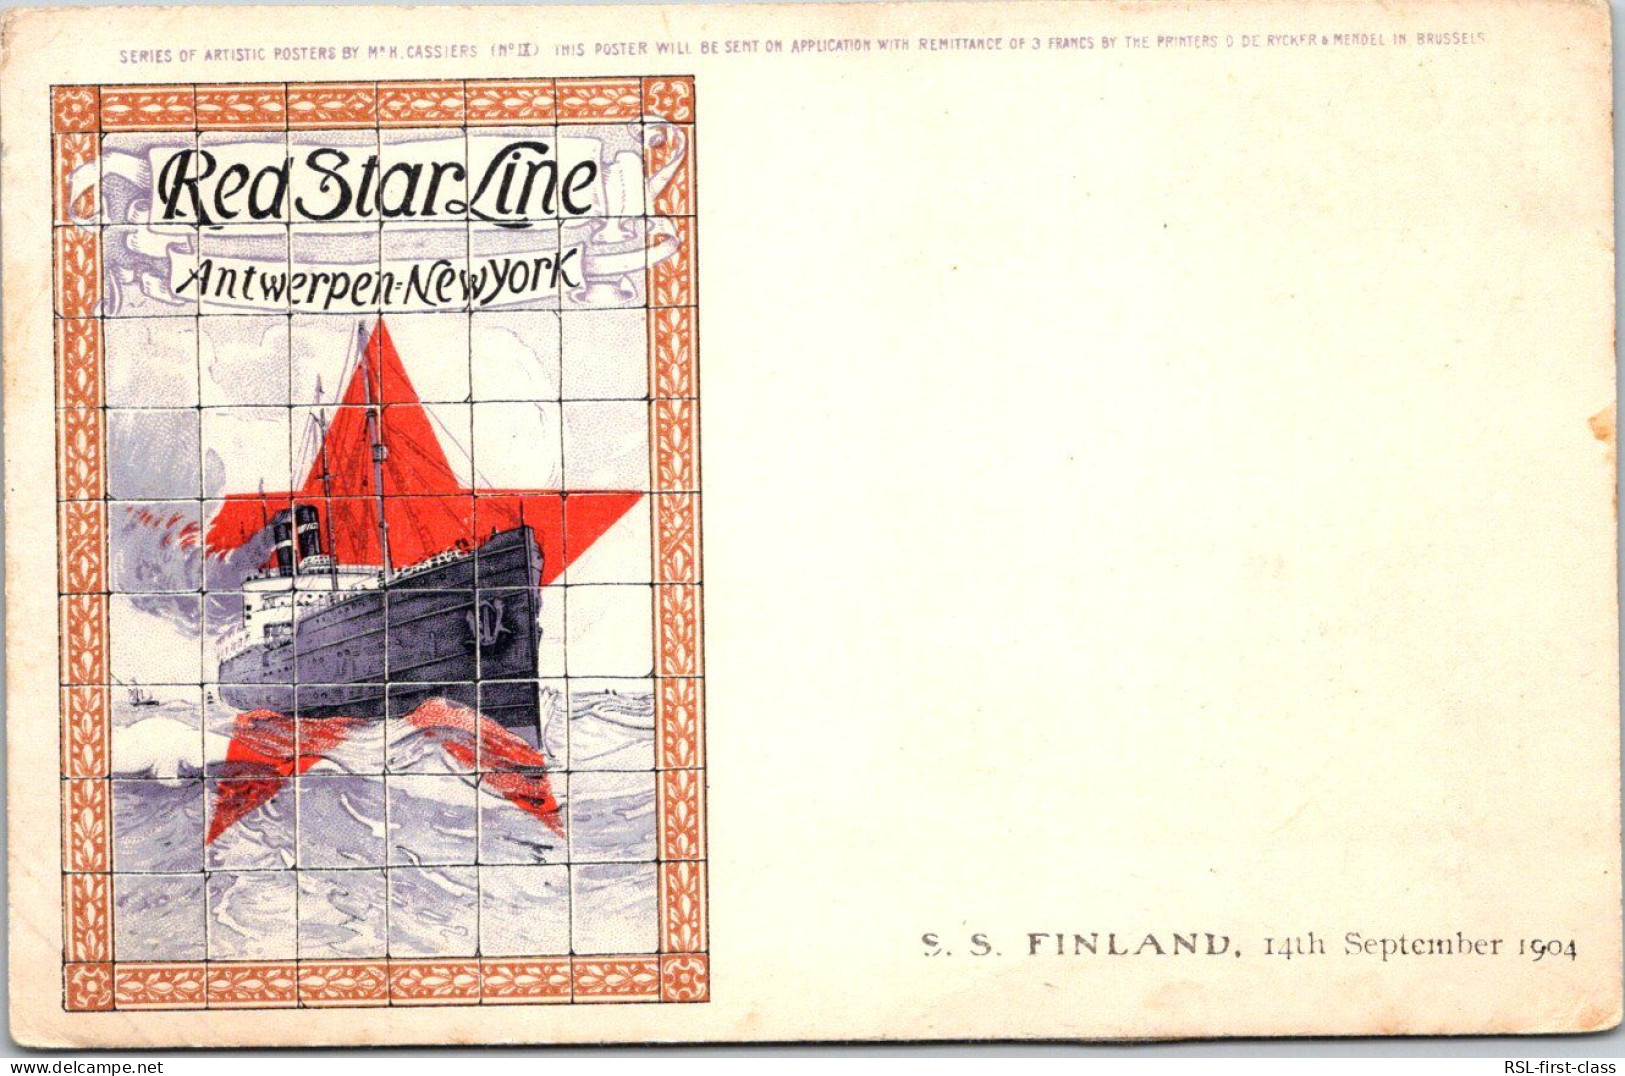 RED STAR LINE : Special Card C-6s From Serie C : Poster Designs, By H. Cassiers - Rrrarissimes - Paquebots